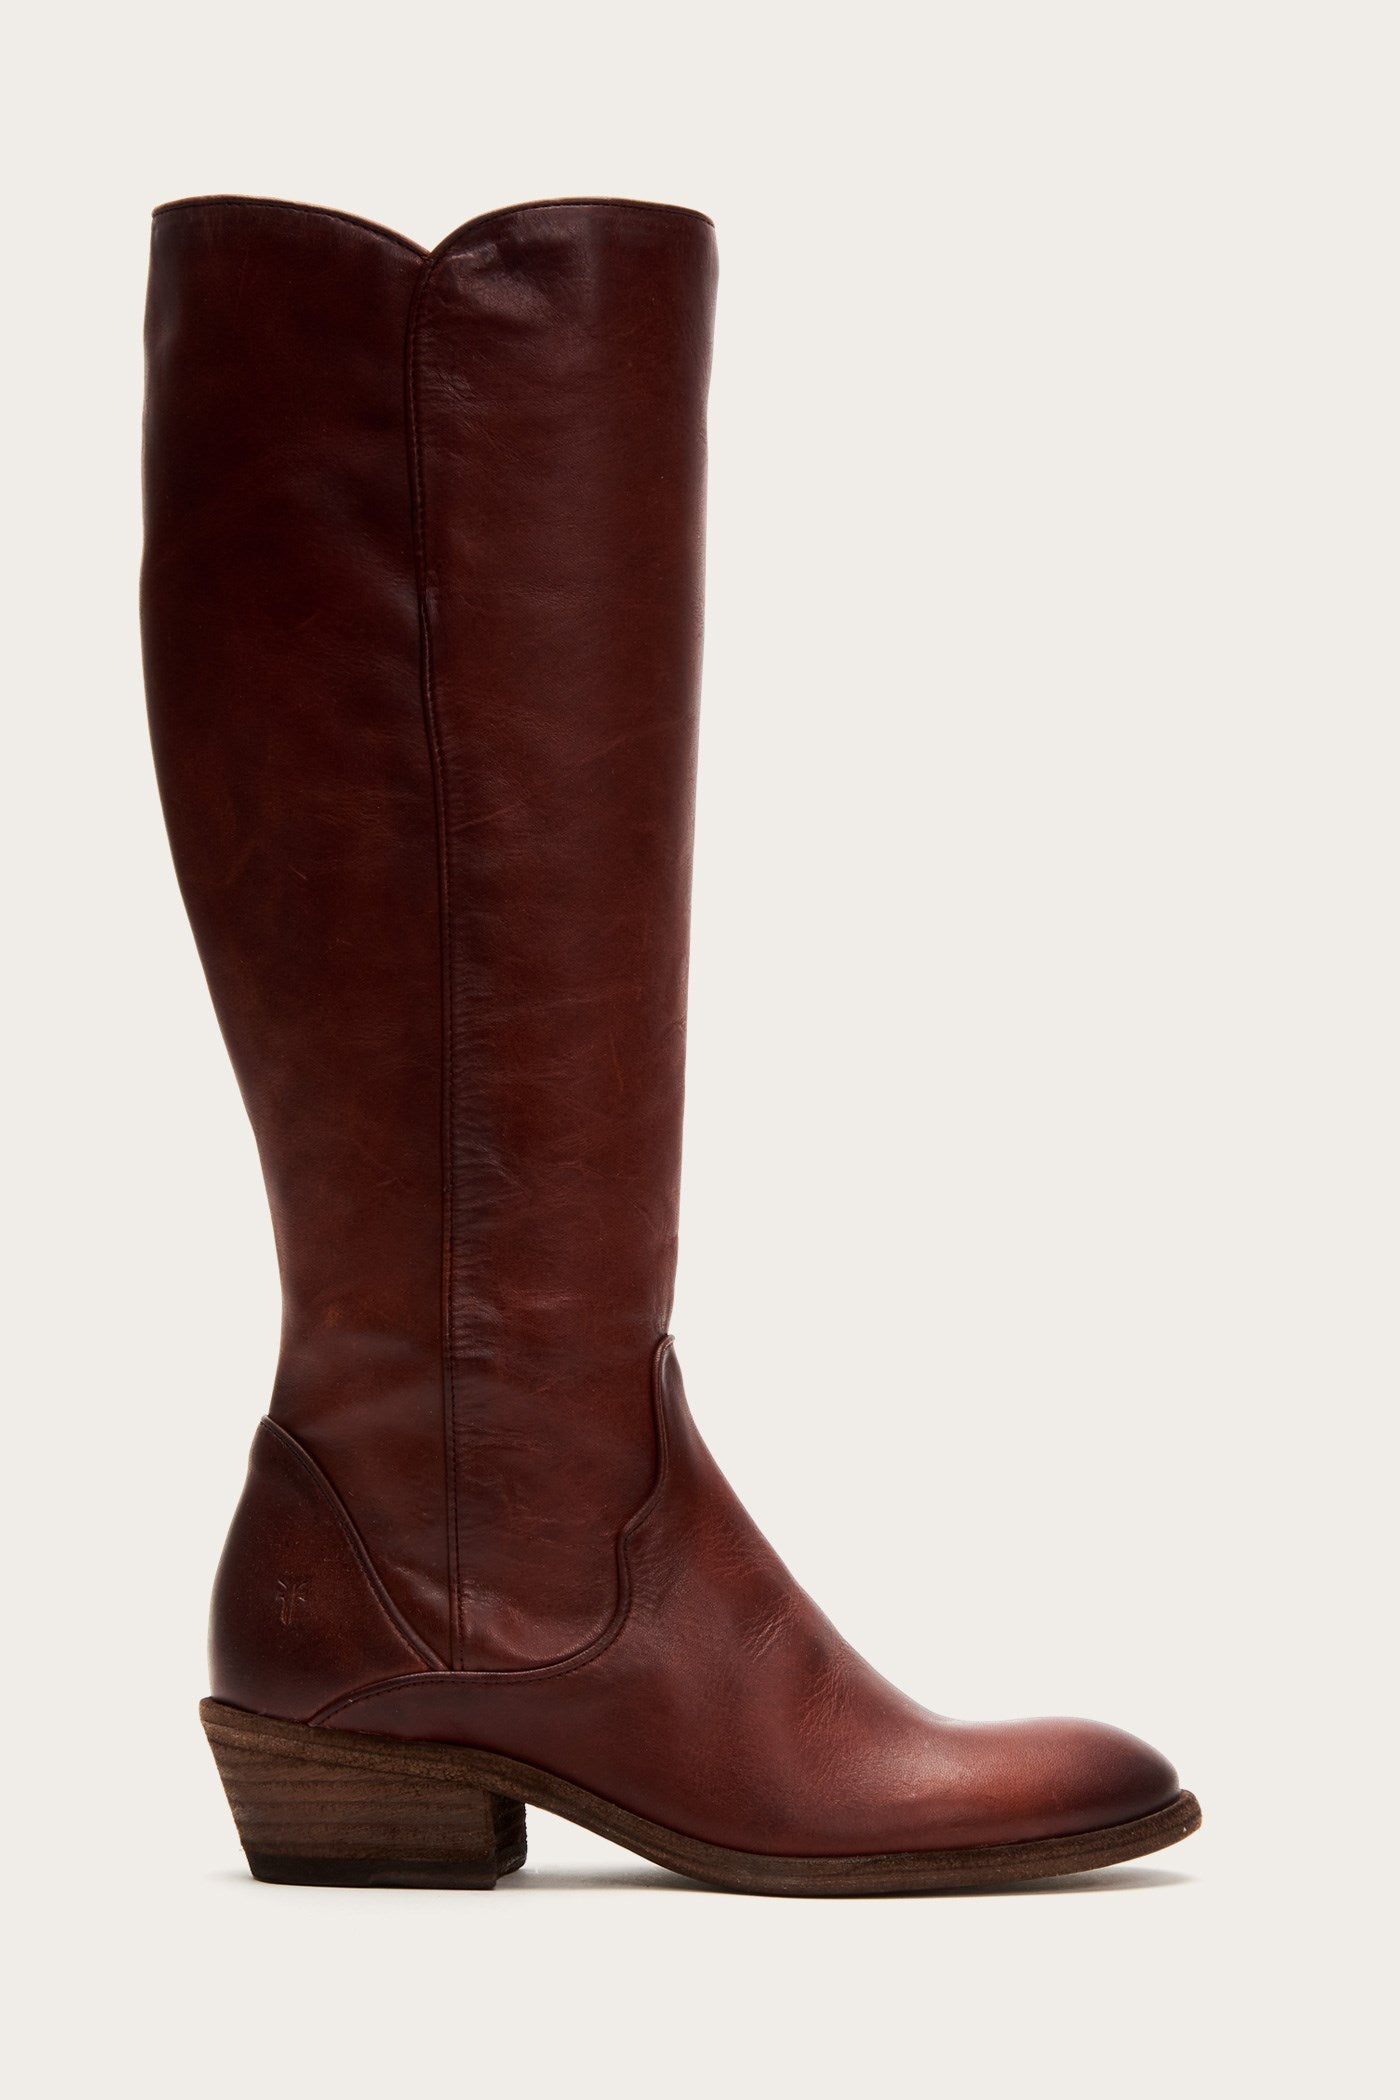 Carson Piping Tall Wide Calf | FRYE 